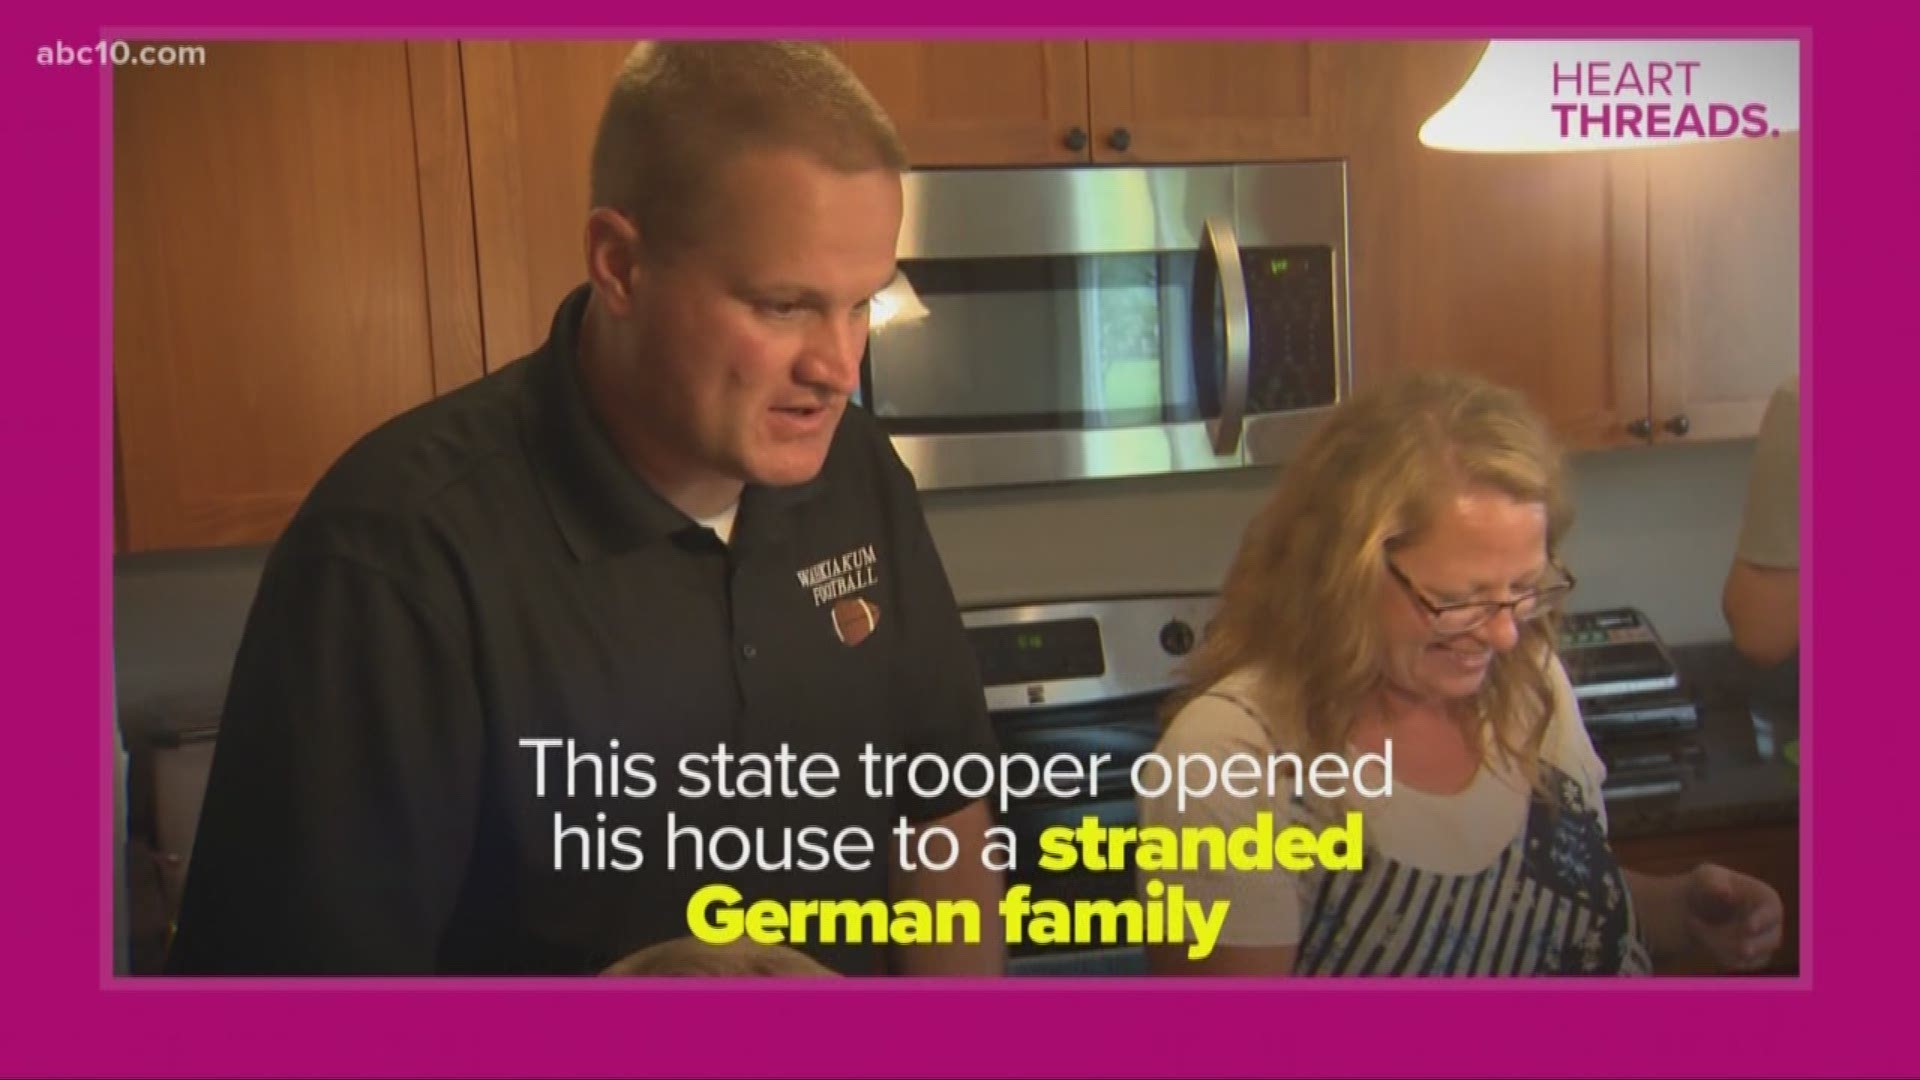 A German family traveling through the U.S. got into a car accident. An Oregon State Trooper was there to help in more ways than they expected.